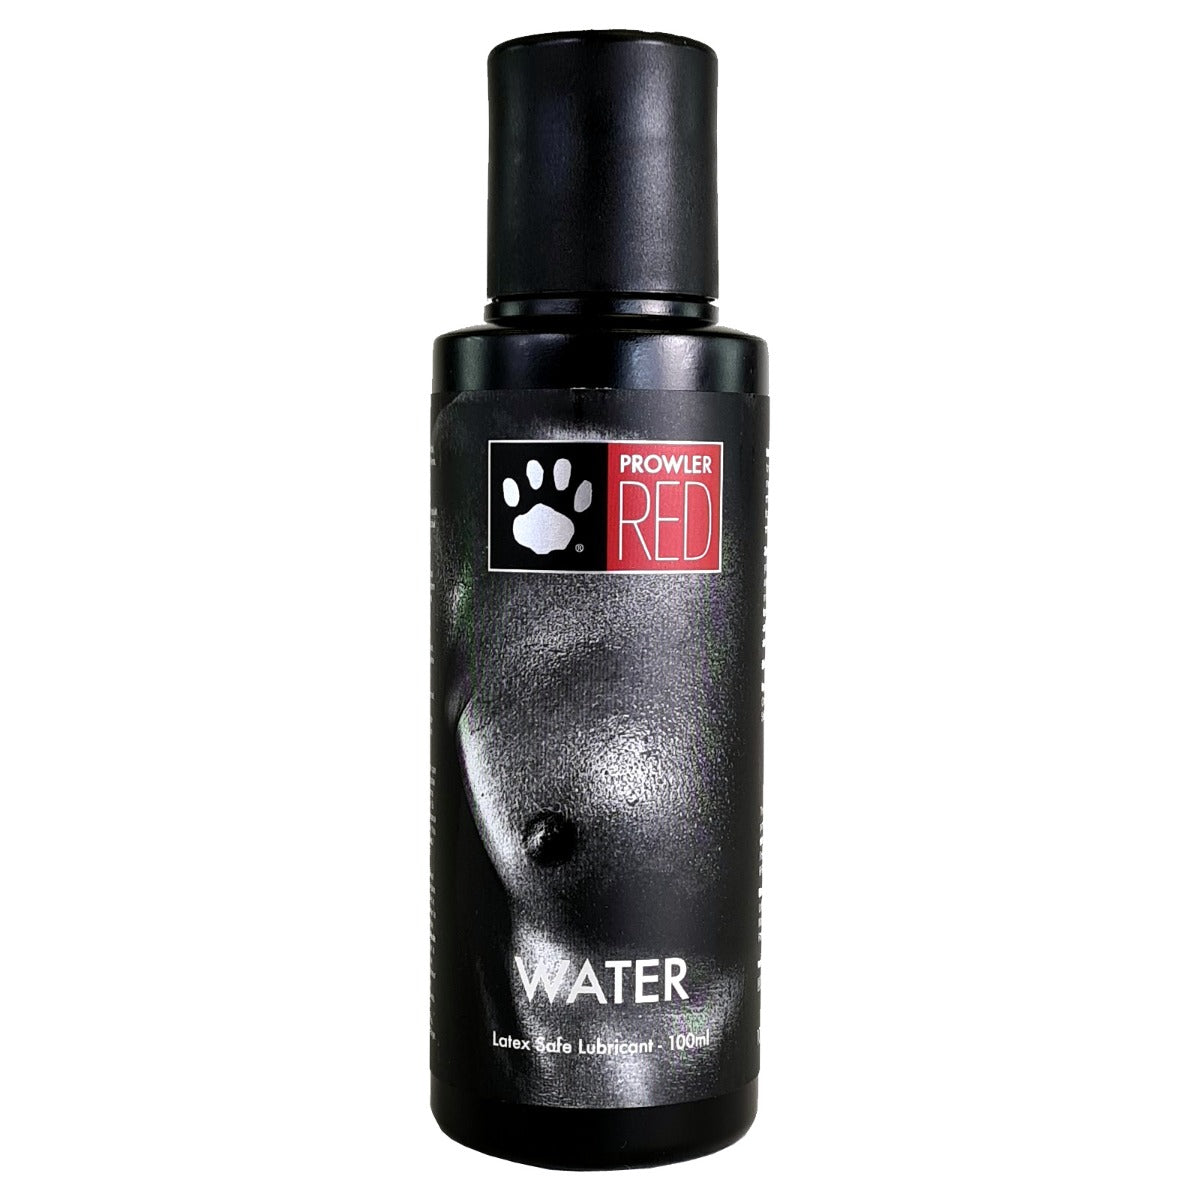 Prowler RED Water water-based Lube (7069675716772)